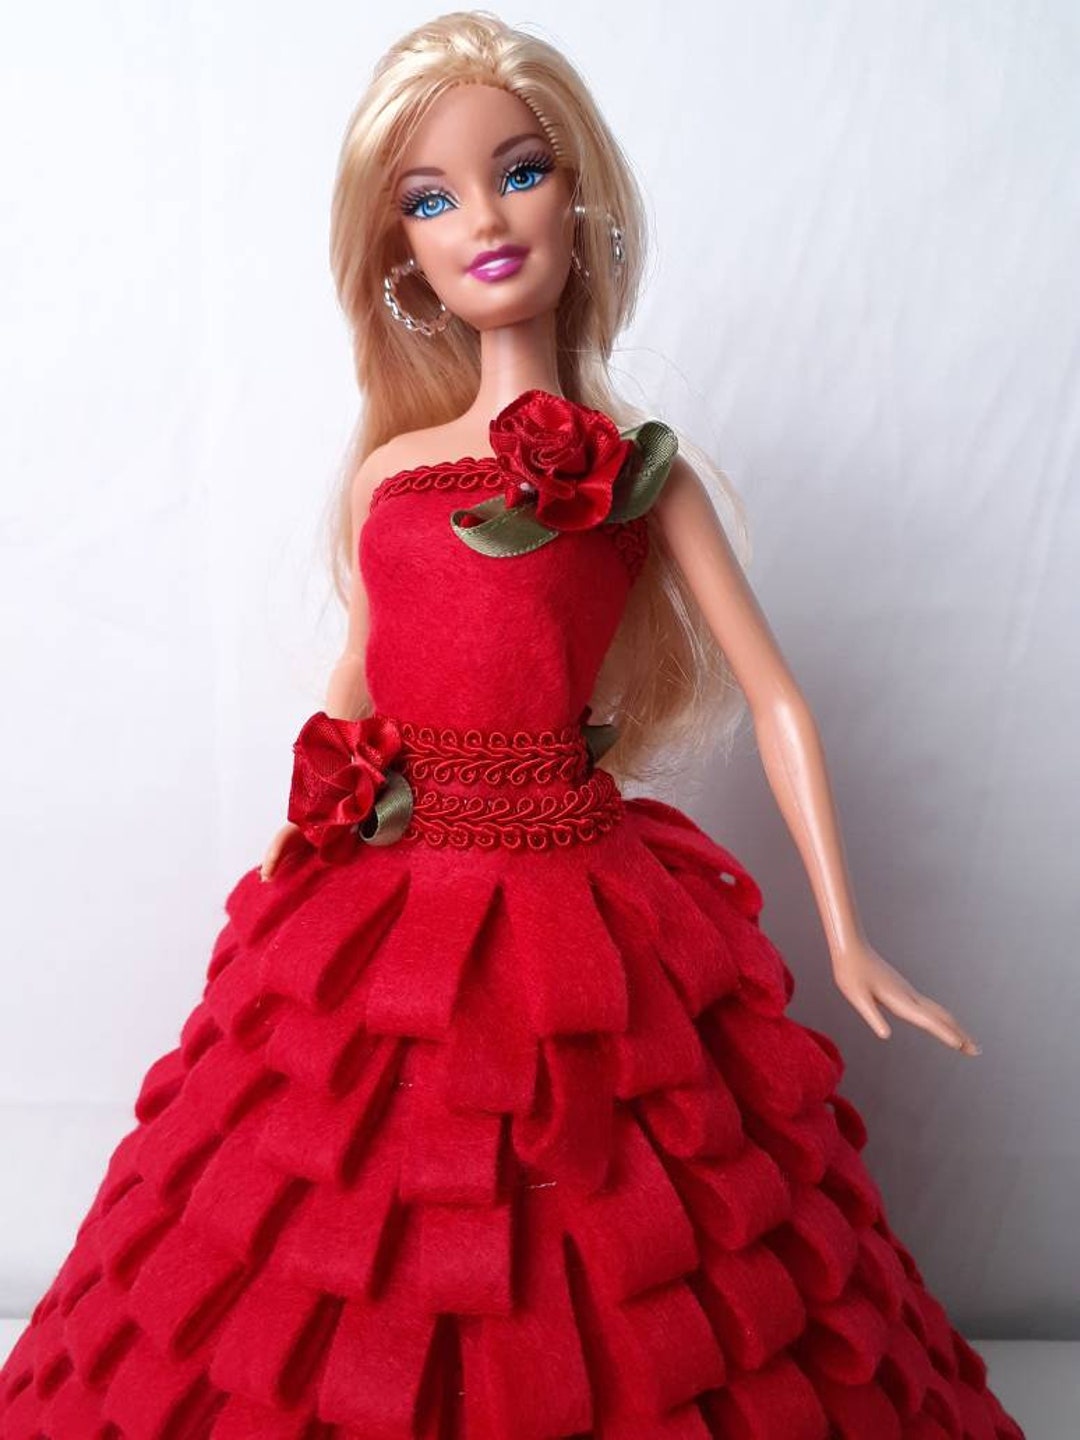 Pin by jingle on FASHION DOLLS COLOURFUL WEDDING DRESSES IN STYLE & | Barbie  dress fashion, Barbie gowns, Dress barbie doll